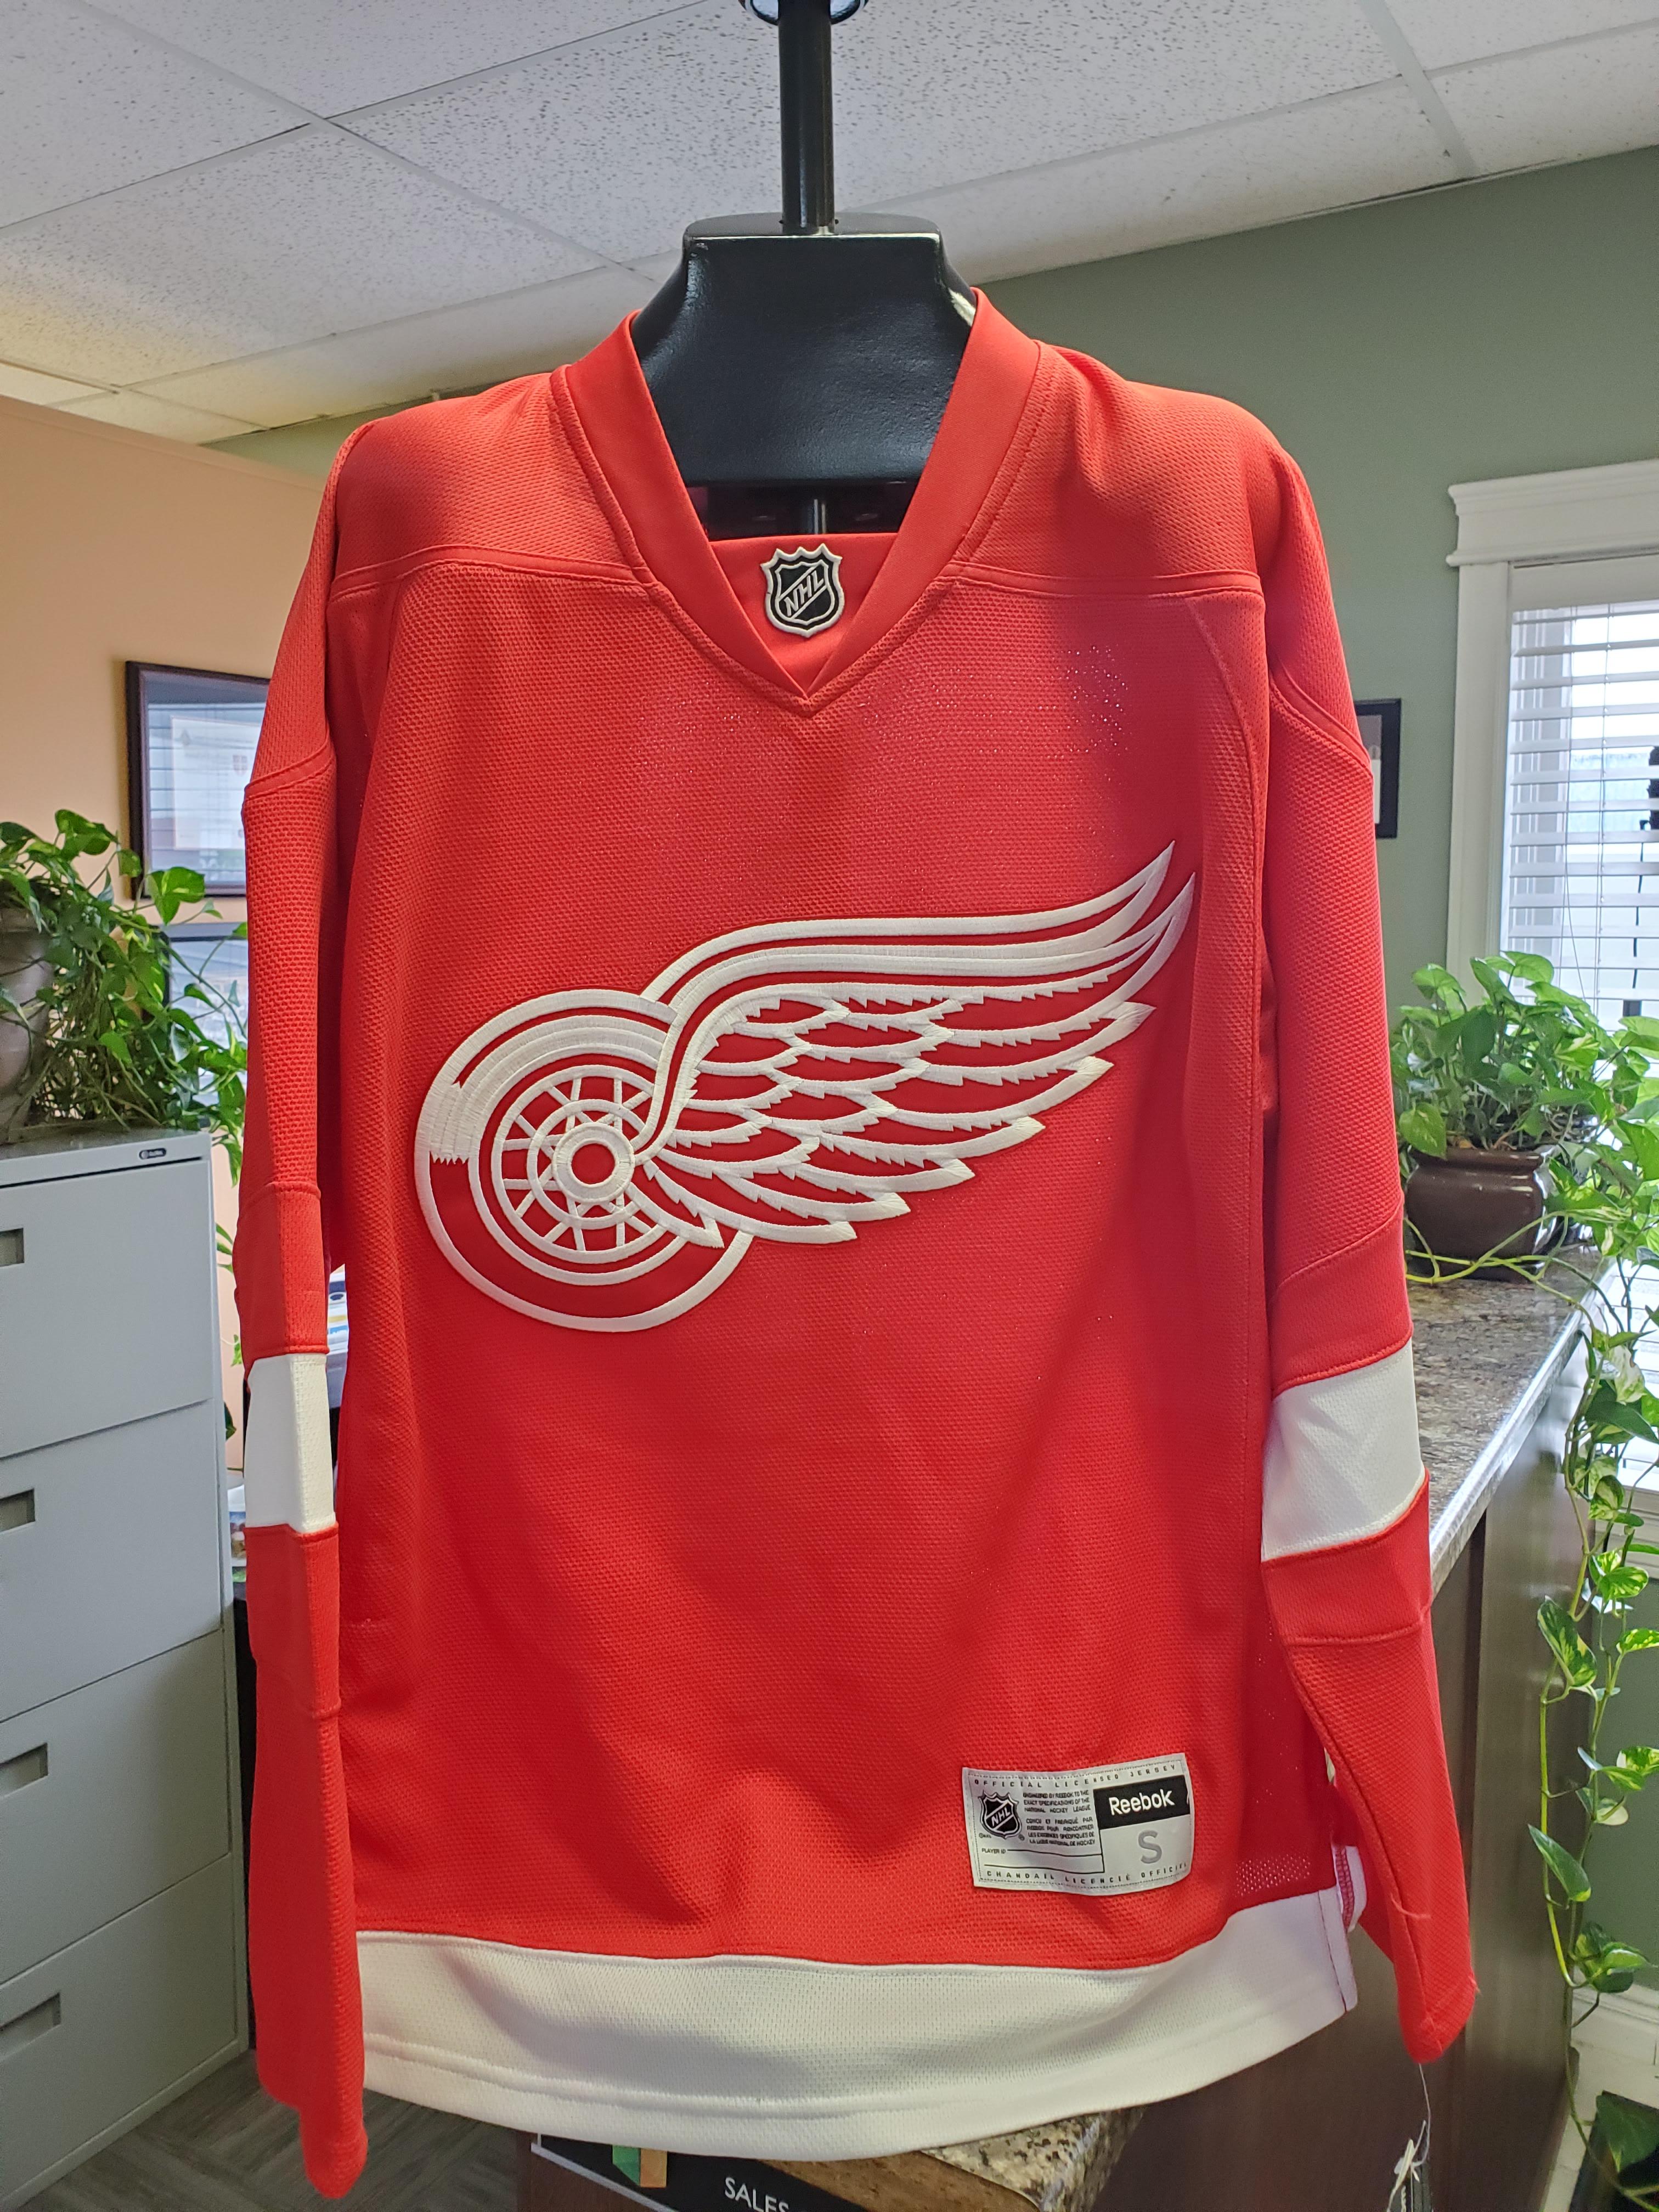 NHL Detroit Red Wings Infant Replica Jersey-Home, Red, Infant One Size(12-24M)